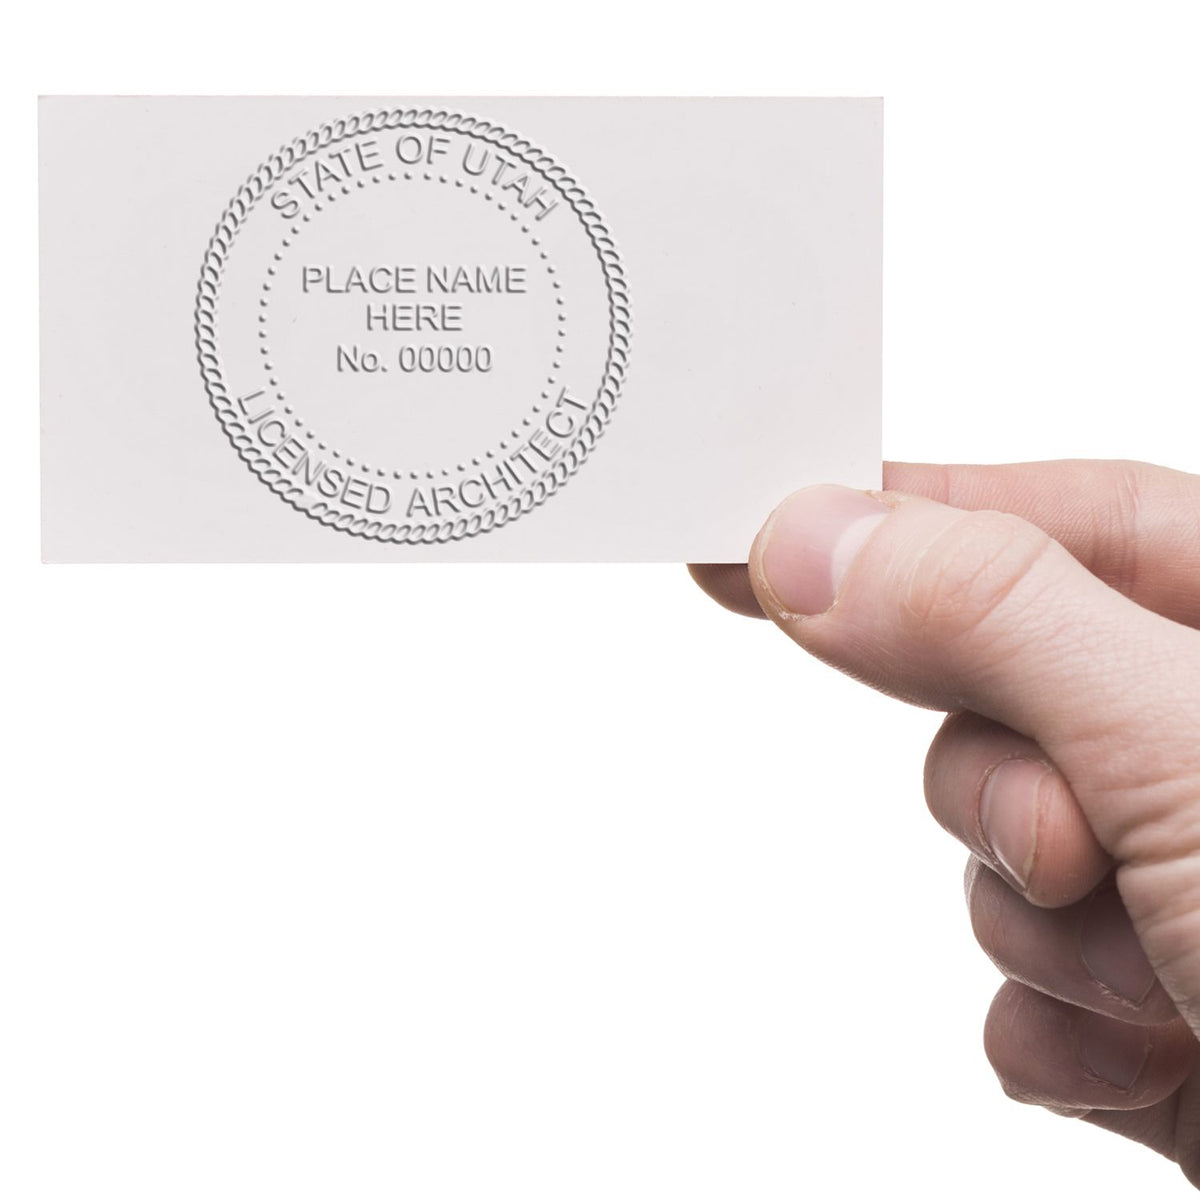 The Utah Desk Architect Embossing Seal stamp impression comes to life with a crisp, detailed photo on paper - showcasing true professional quality.